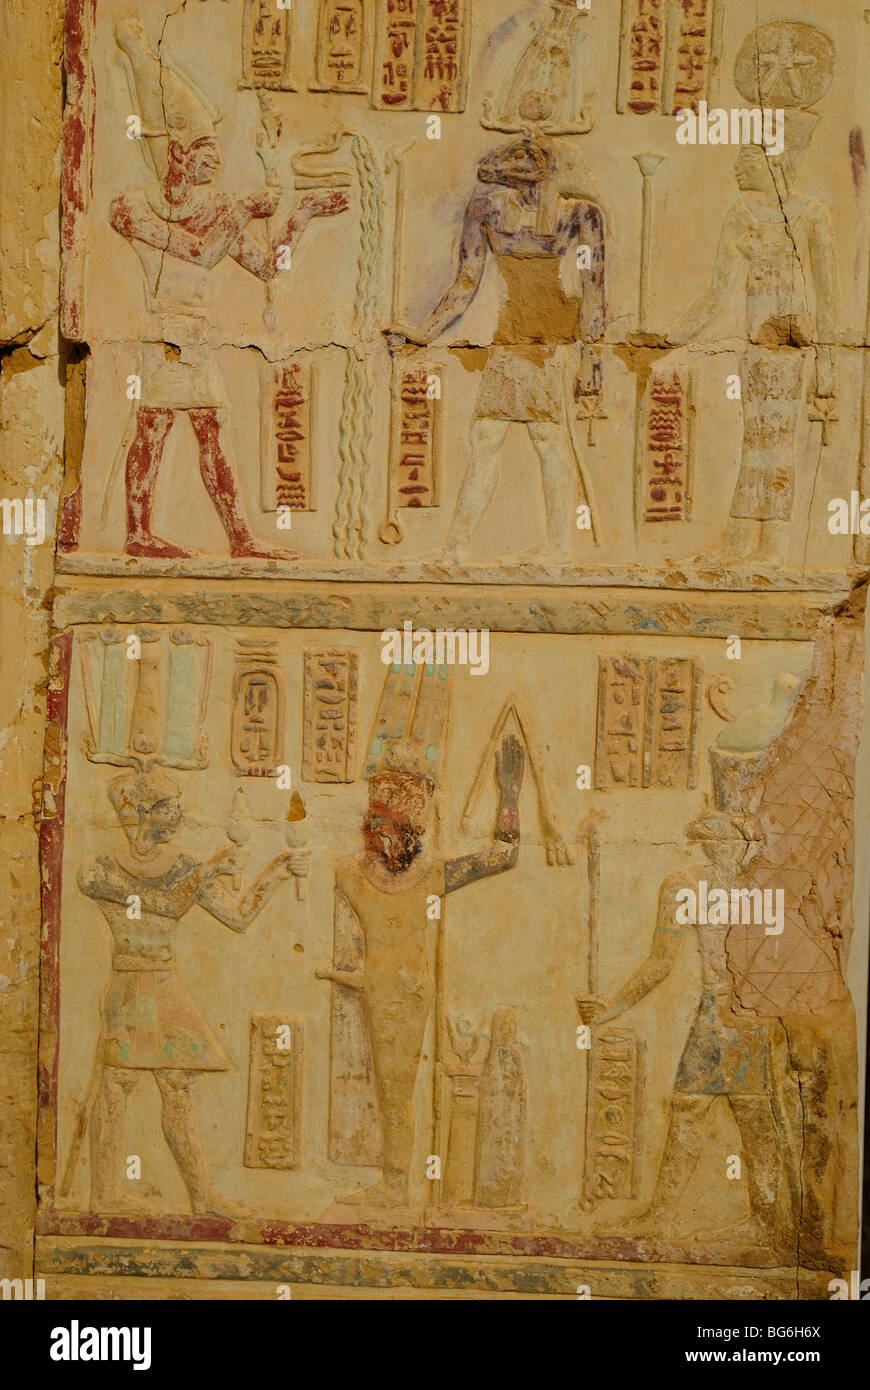 Colored reliefs of Amun-re and Mut gods at Deir al-Hagar Temple, western desert of Egypt Stock Photo